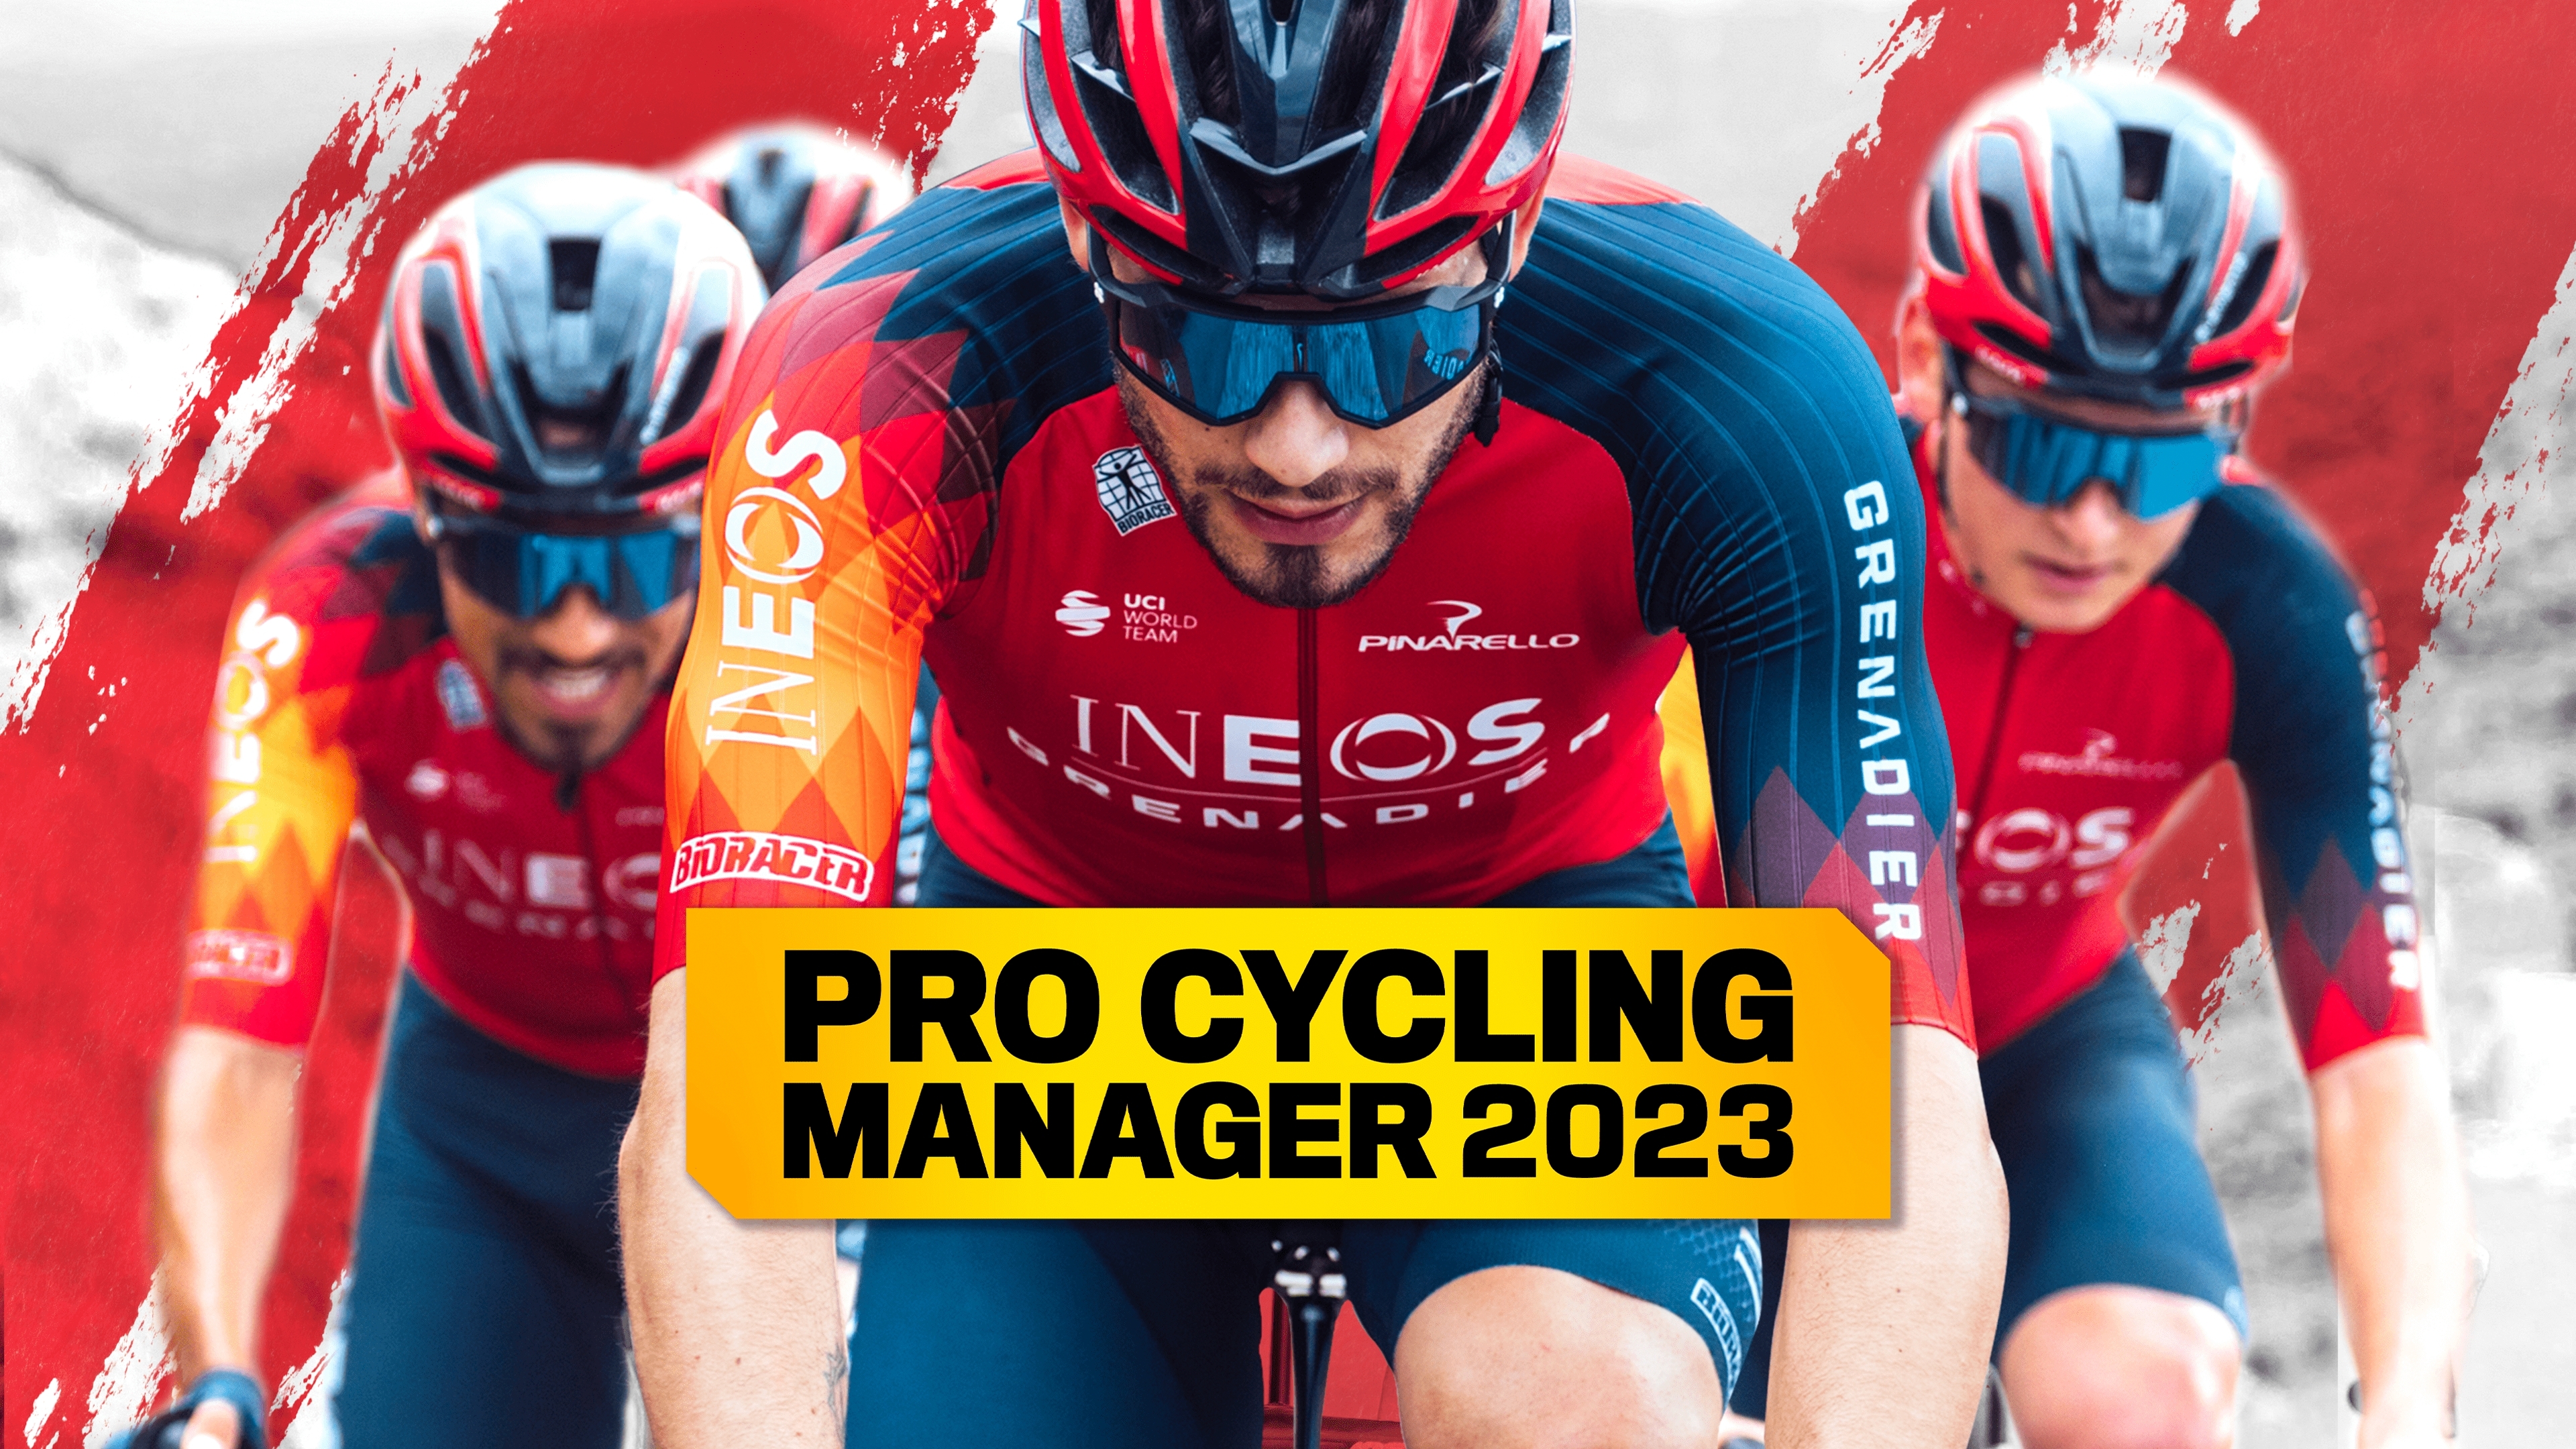 Steam Community :: Pro Cycling Manager 2021